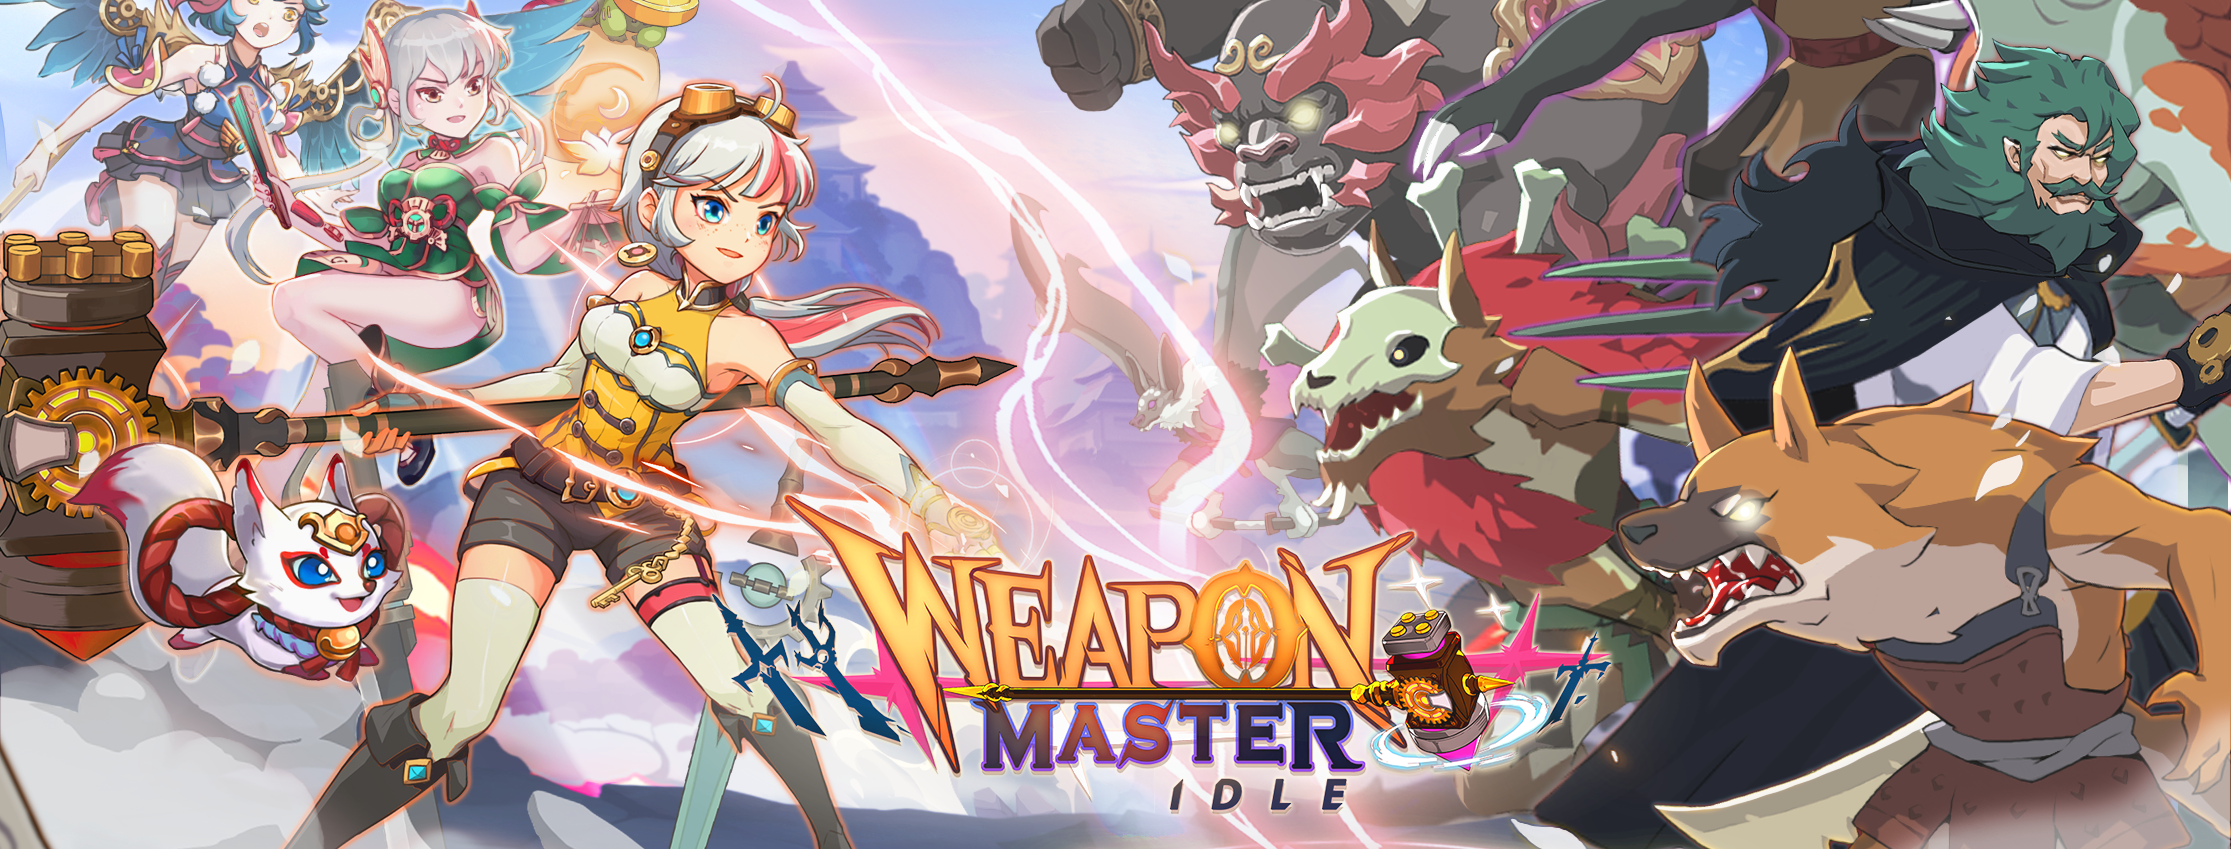 Weapon Master Idle